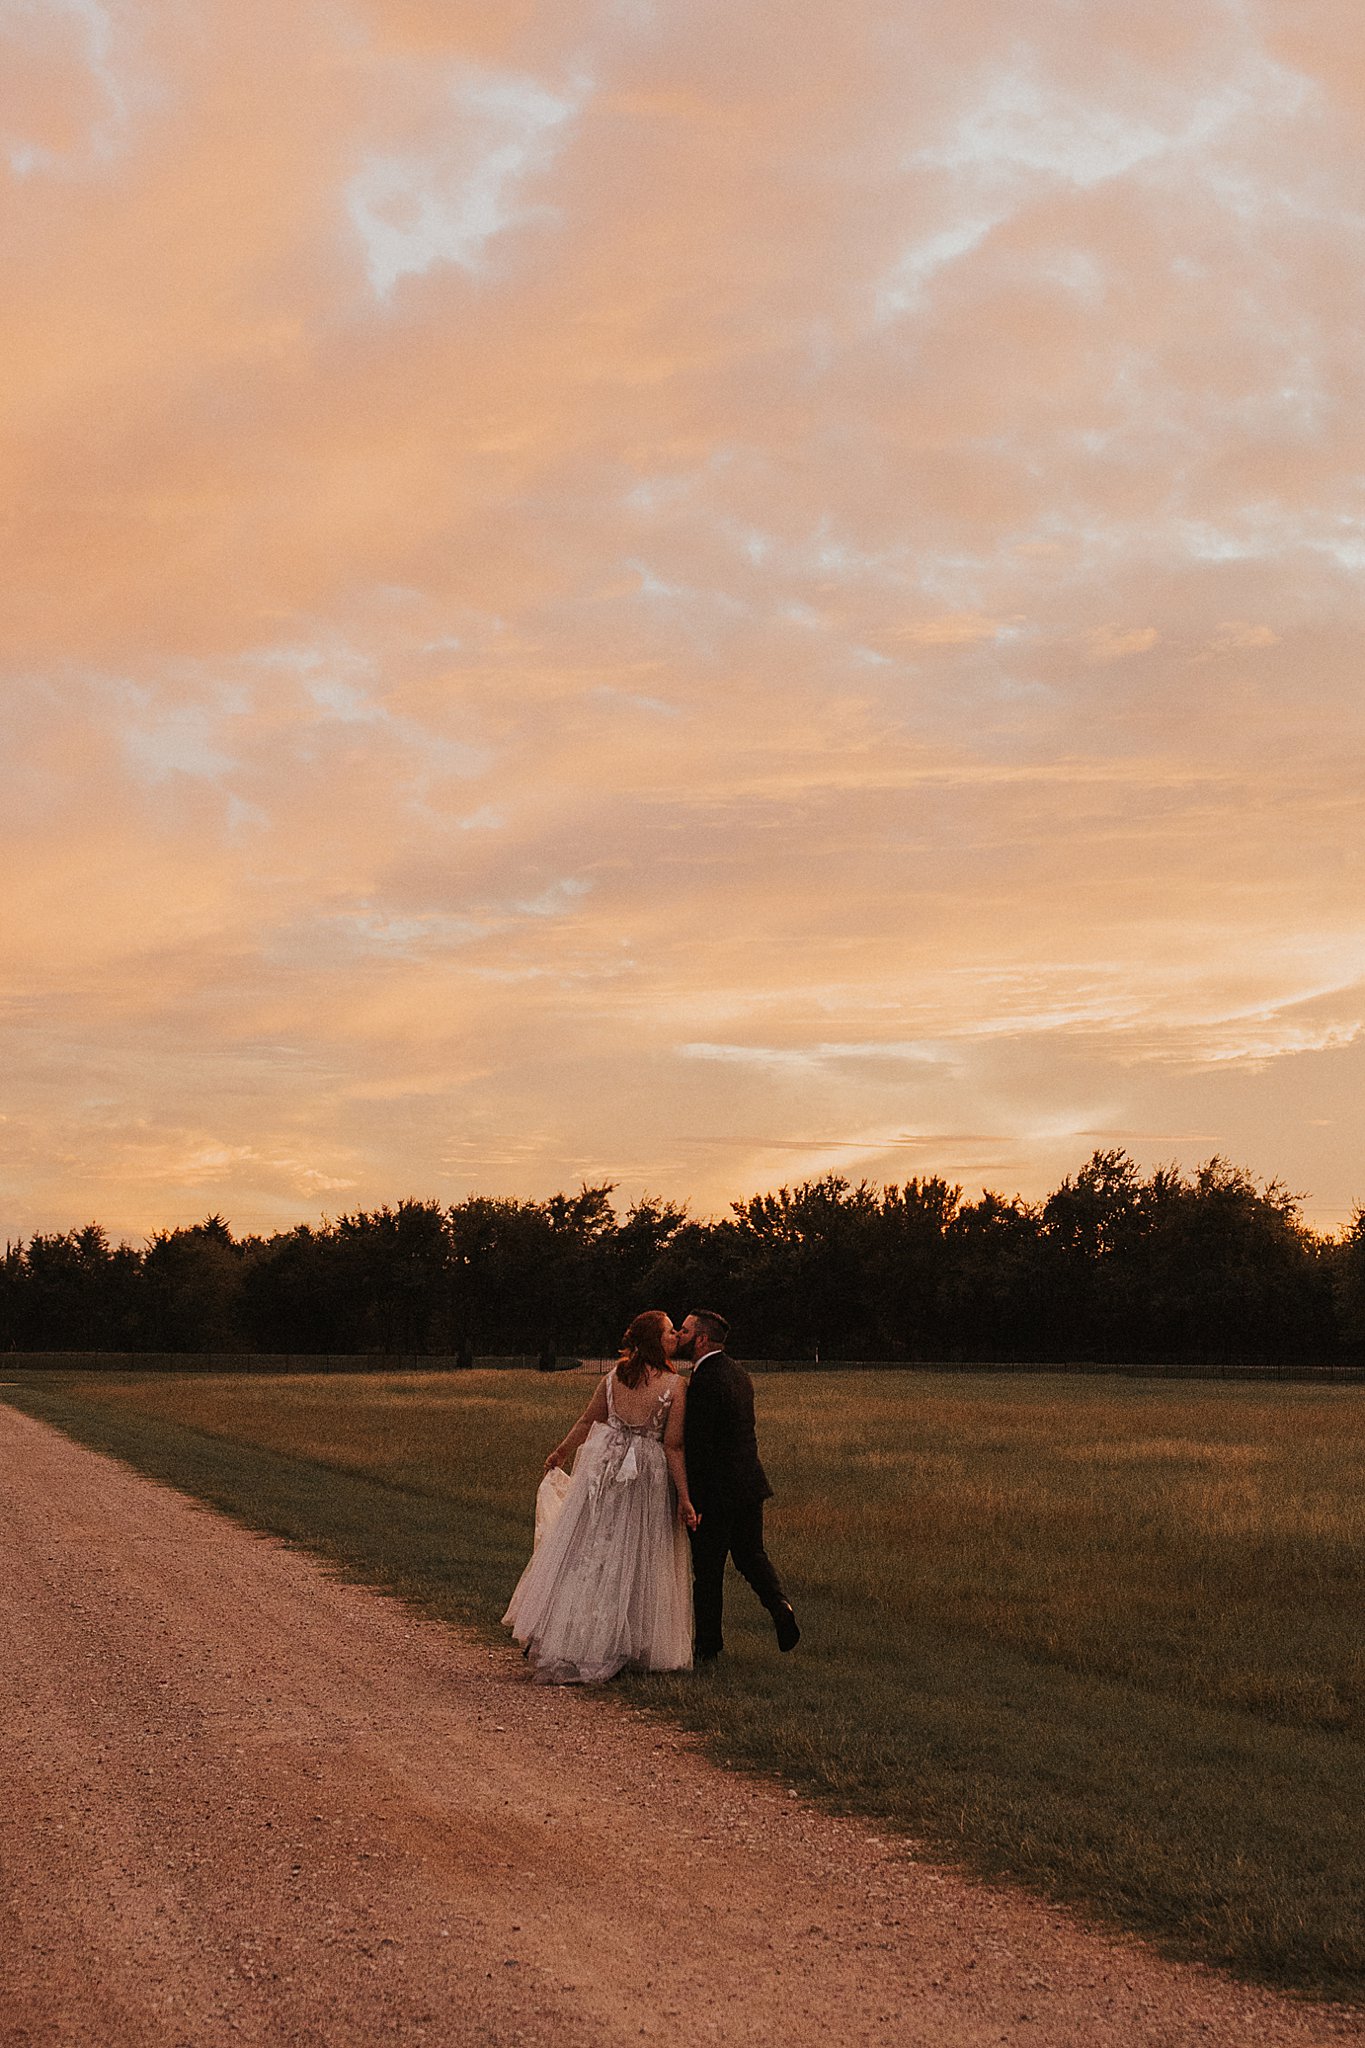 This was a gorgeous fall day at the Emerson wedding venue in Dallas, TX.